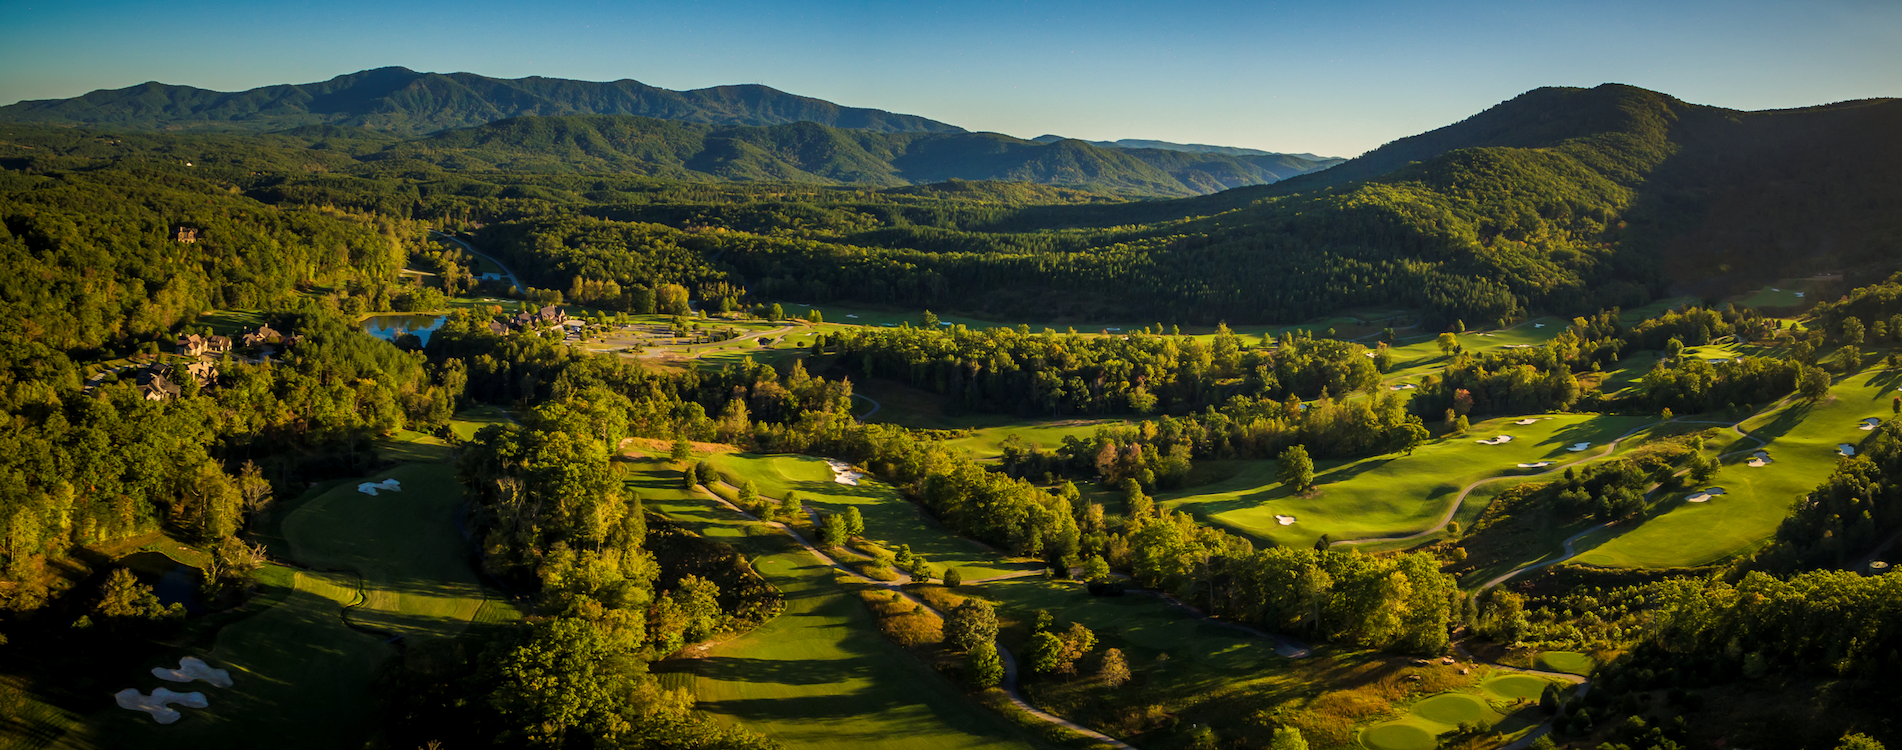 Aerial view of the Bright's Creek Golf Course in Mill Spring, NC in the Blue Ridge Mountains